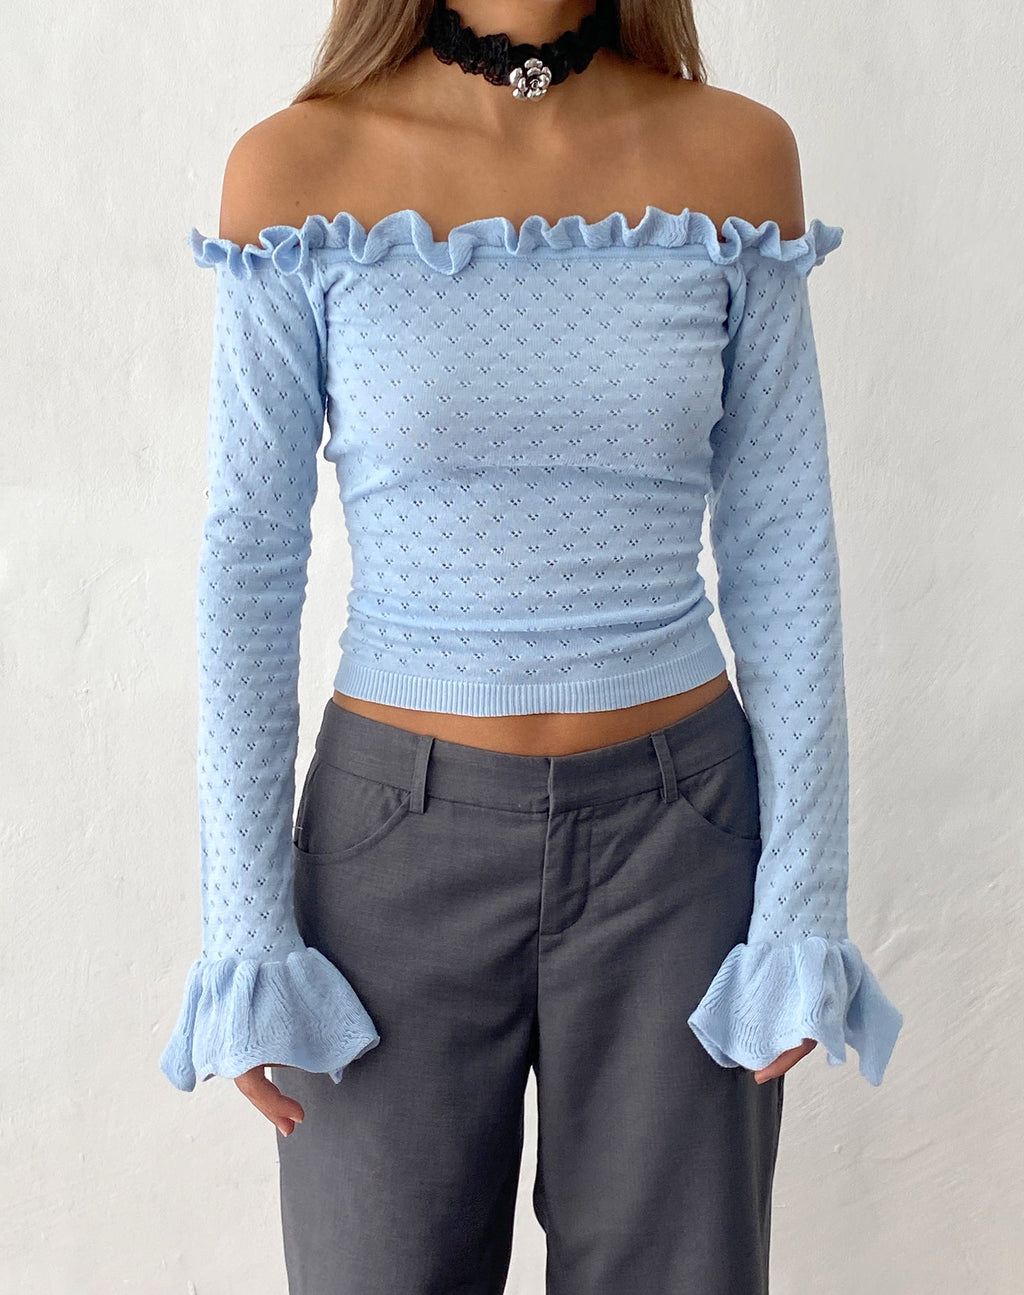 Delaney Knitted Frill Bardot Top in Baby Blue